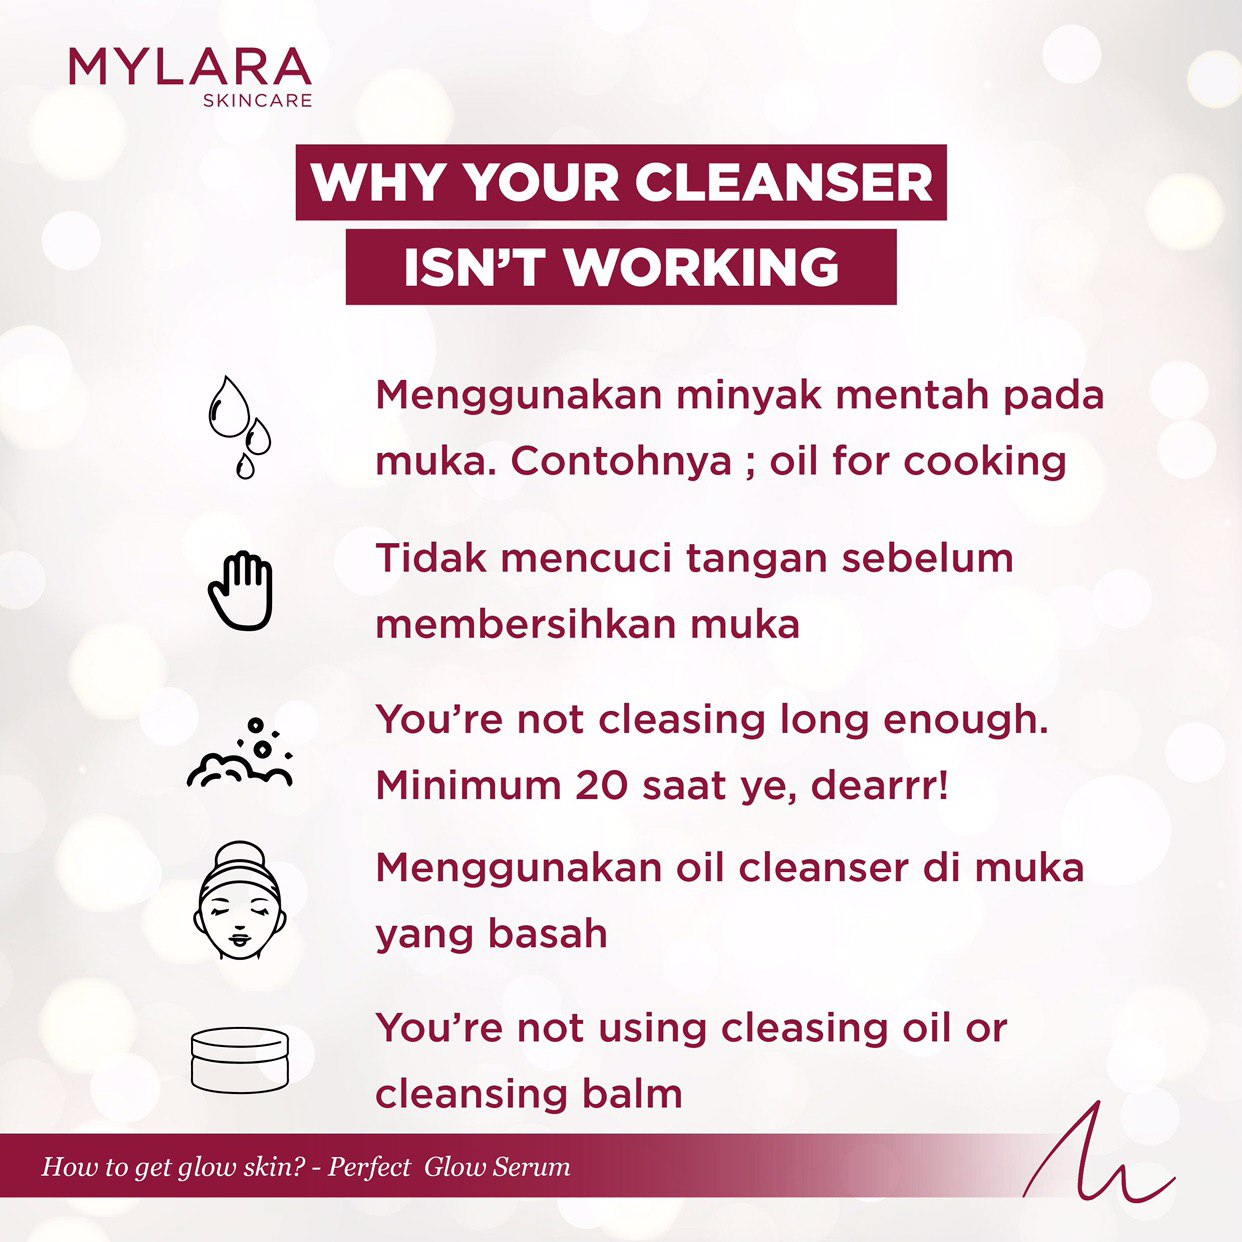 WHY YOUR CLEANSER ISN'T WORKING - MYLARA Skincare